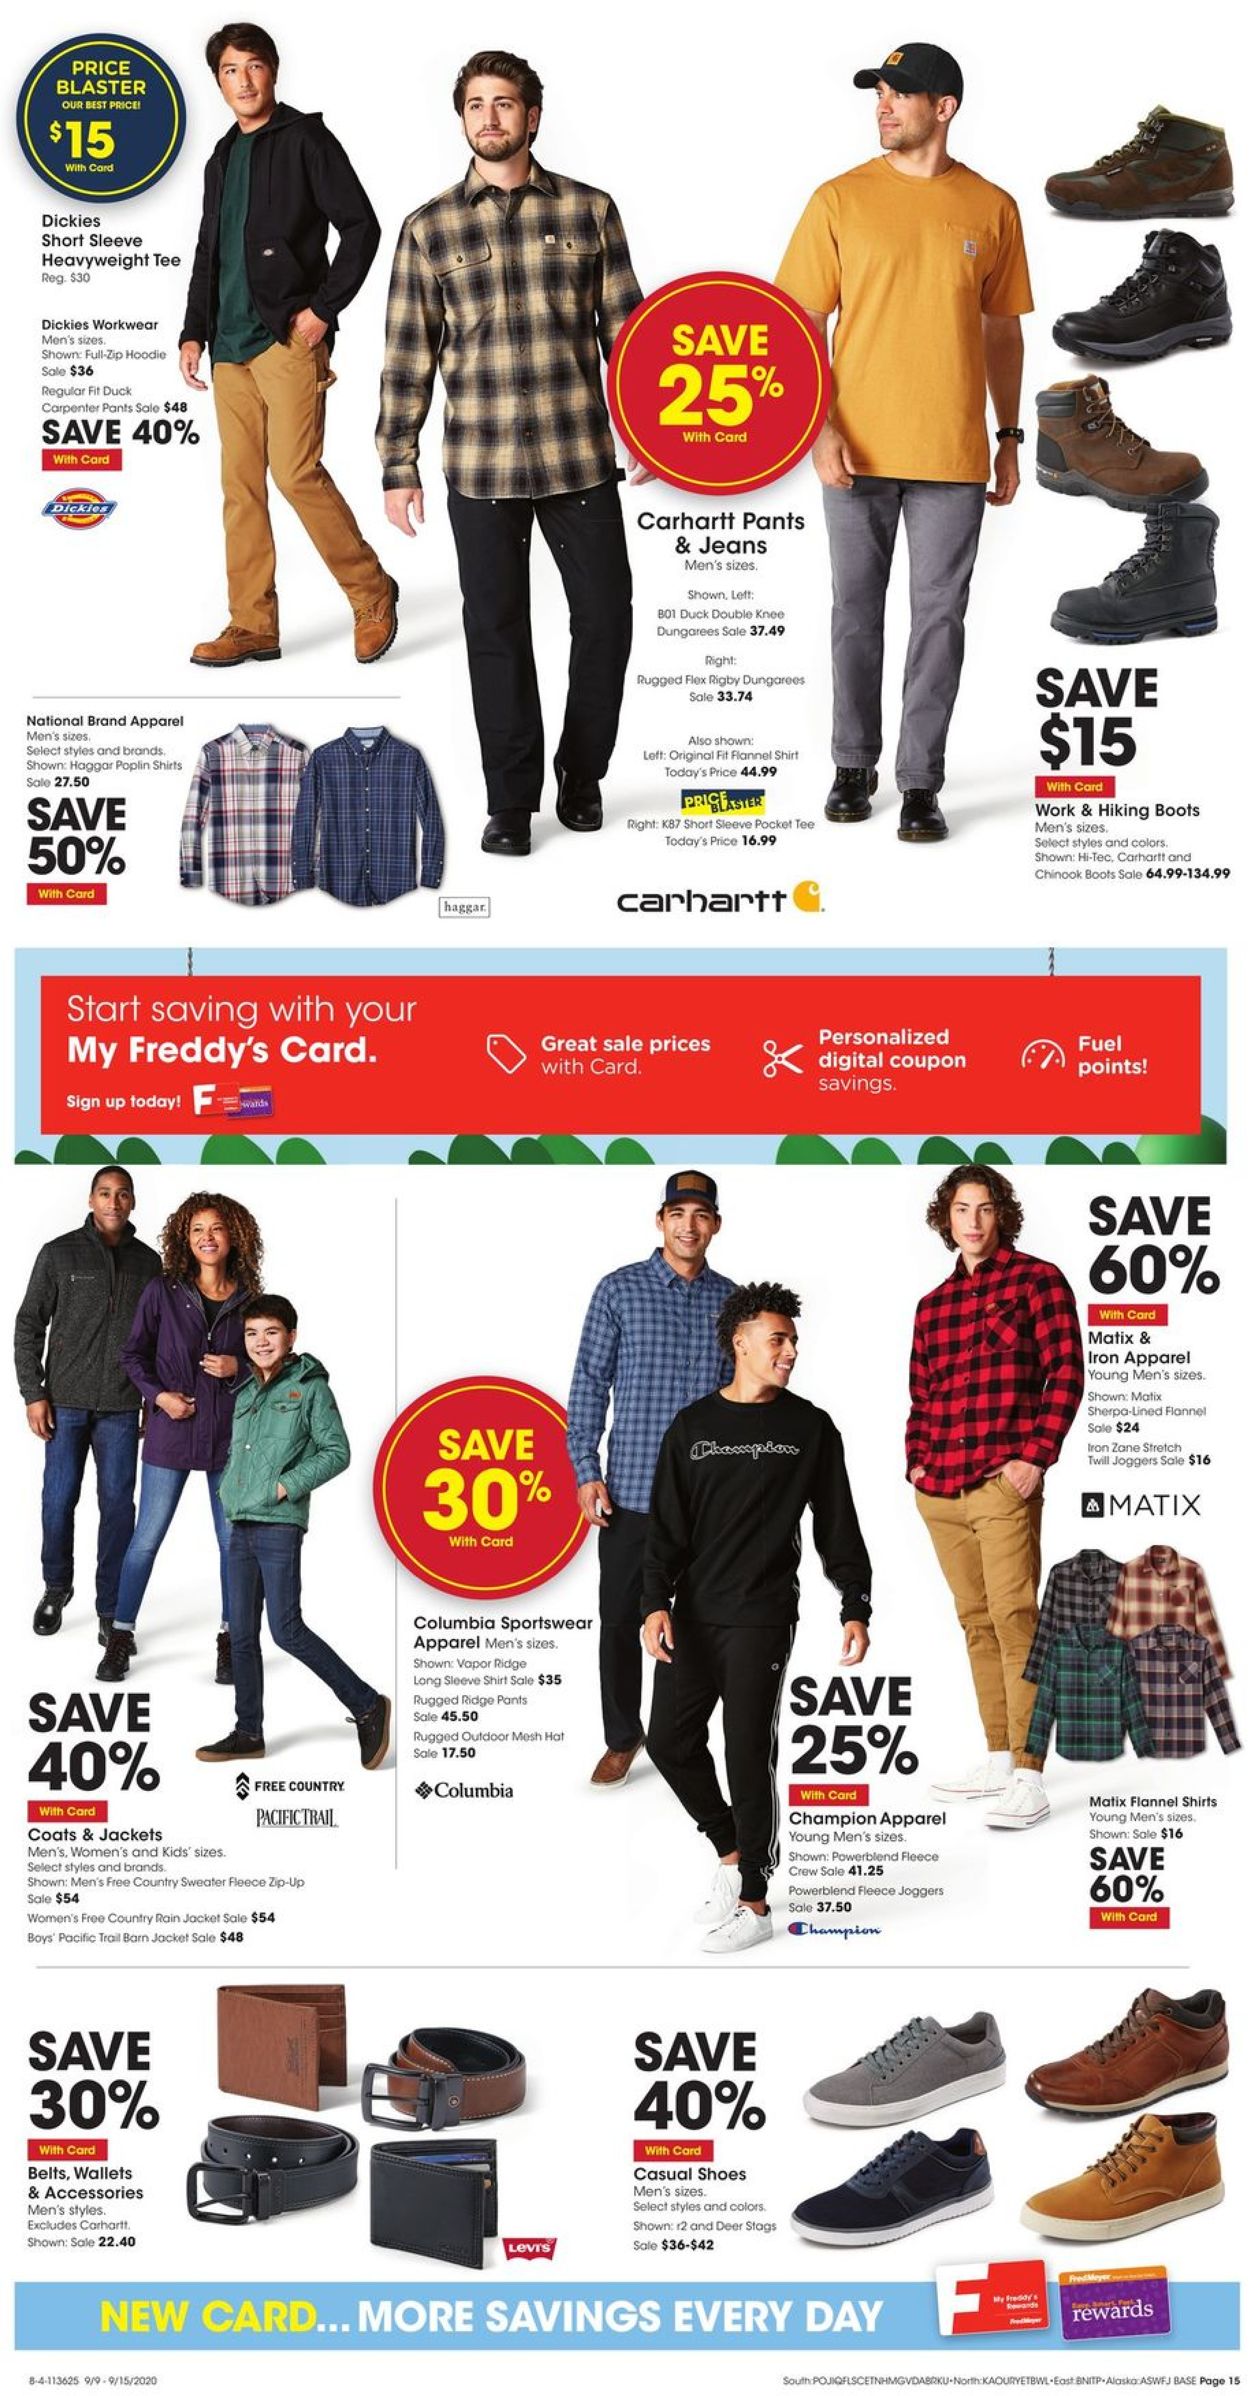 Fred Meyer Ad from 09/09/2020